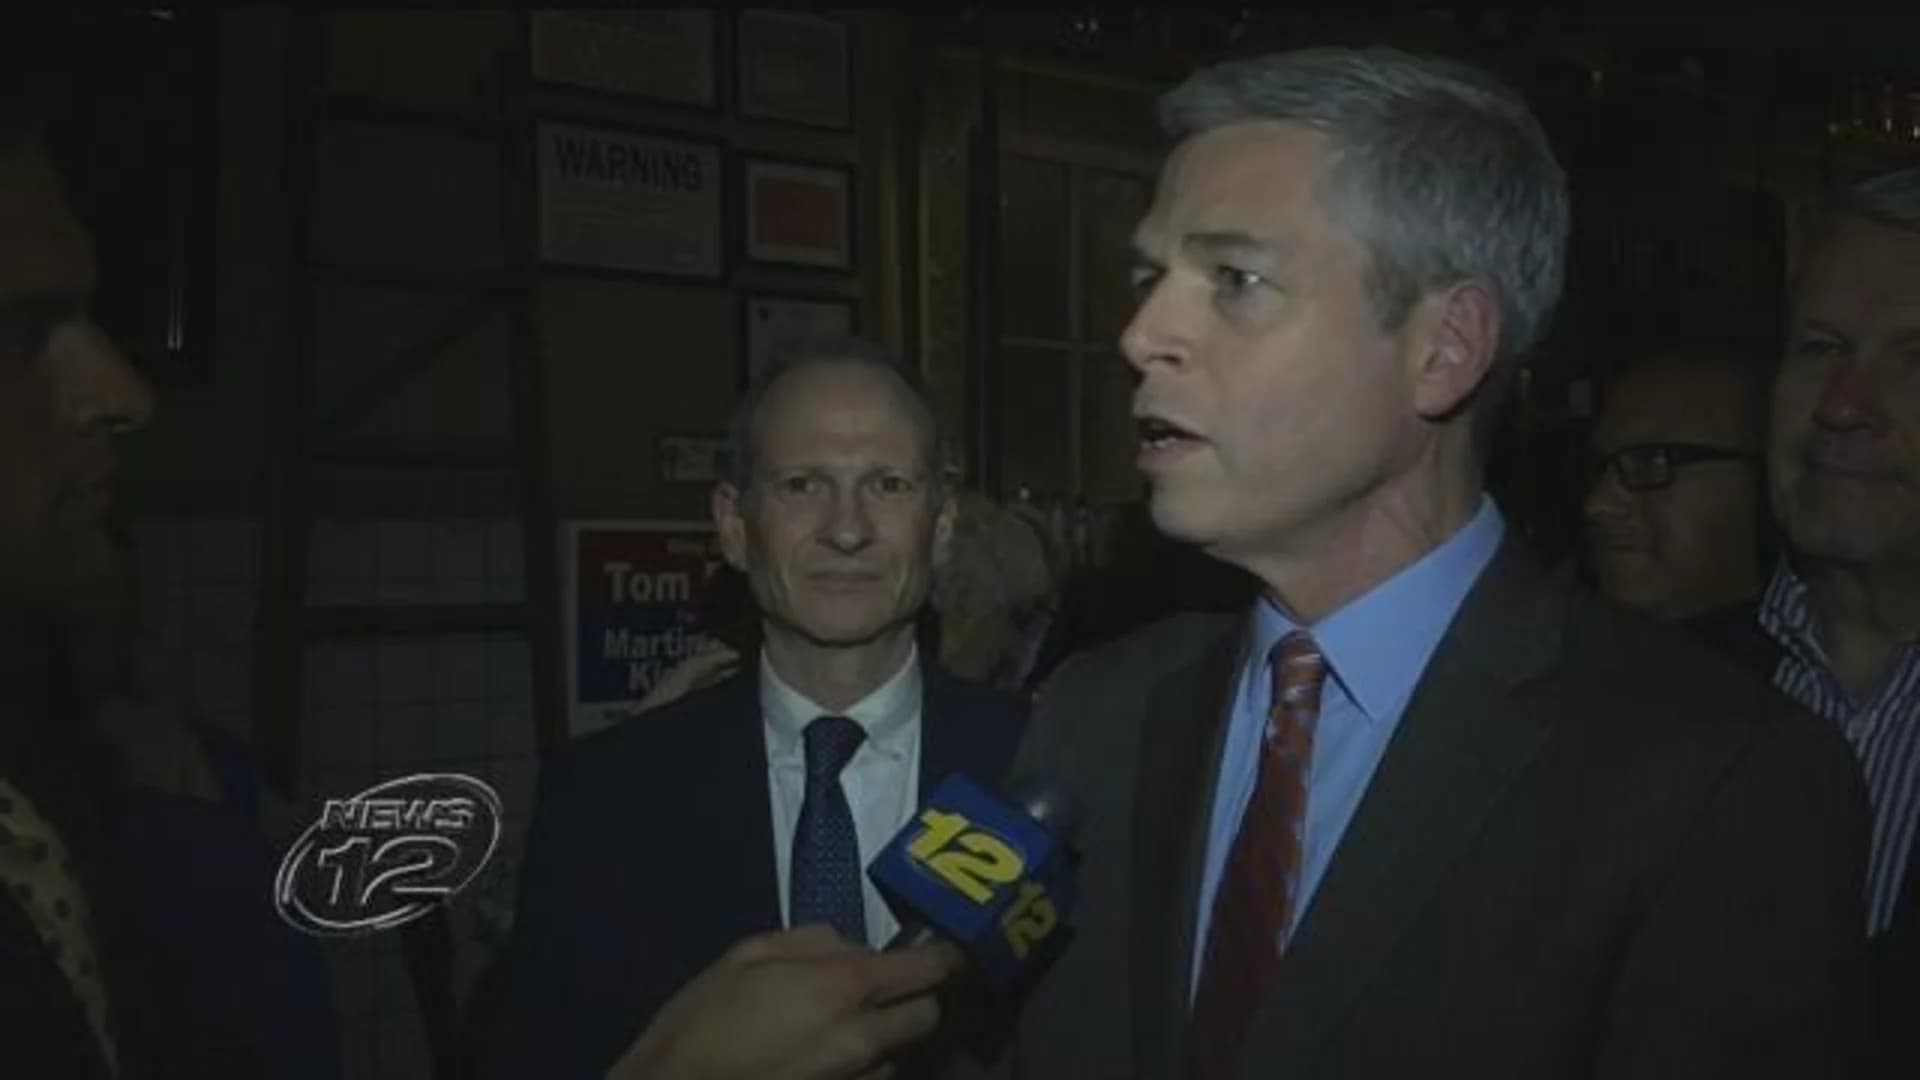 Thomas Roach declares victory in White Plains mayoral race